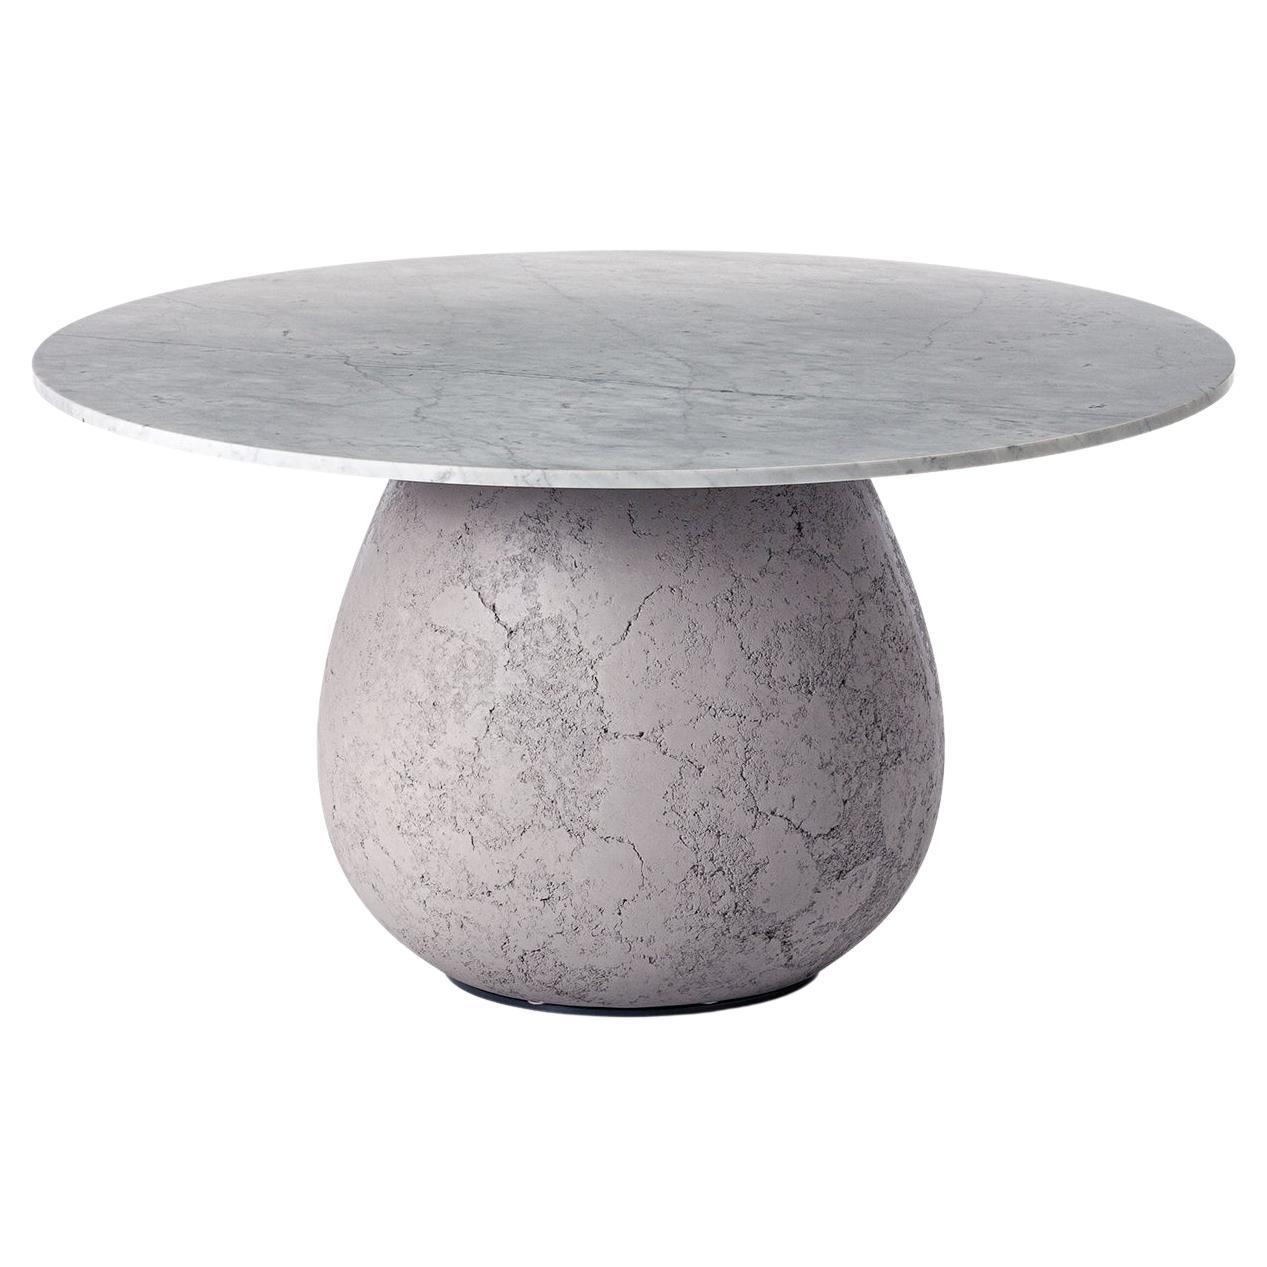 Concrete Round Table For Sale